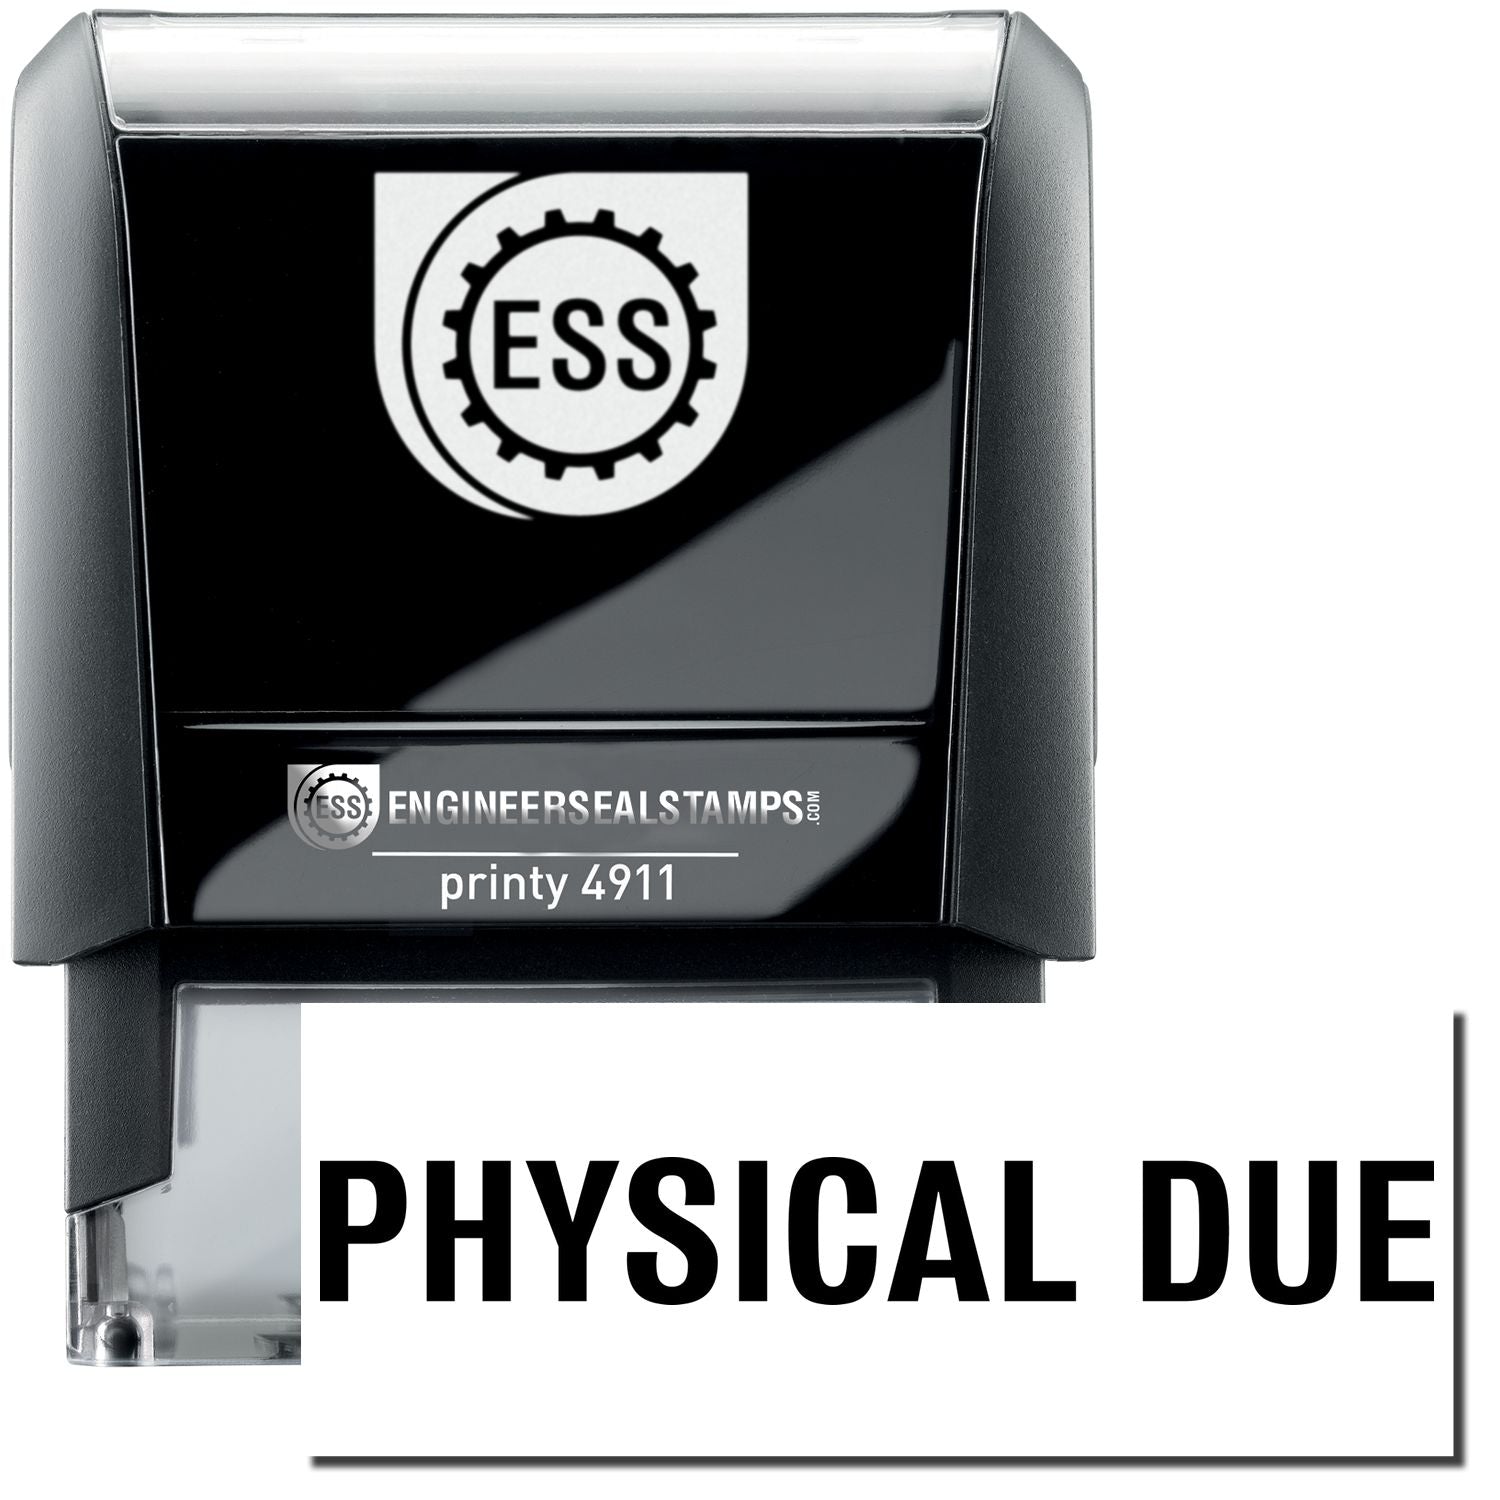 A self-inking stamp with a stamped image showing how the text "PHYSICAL DUE" in bold font is displayed after stamping.